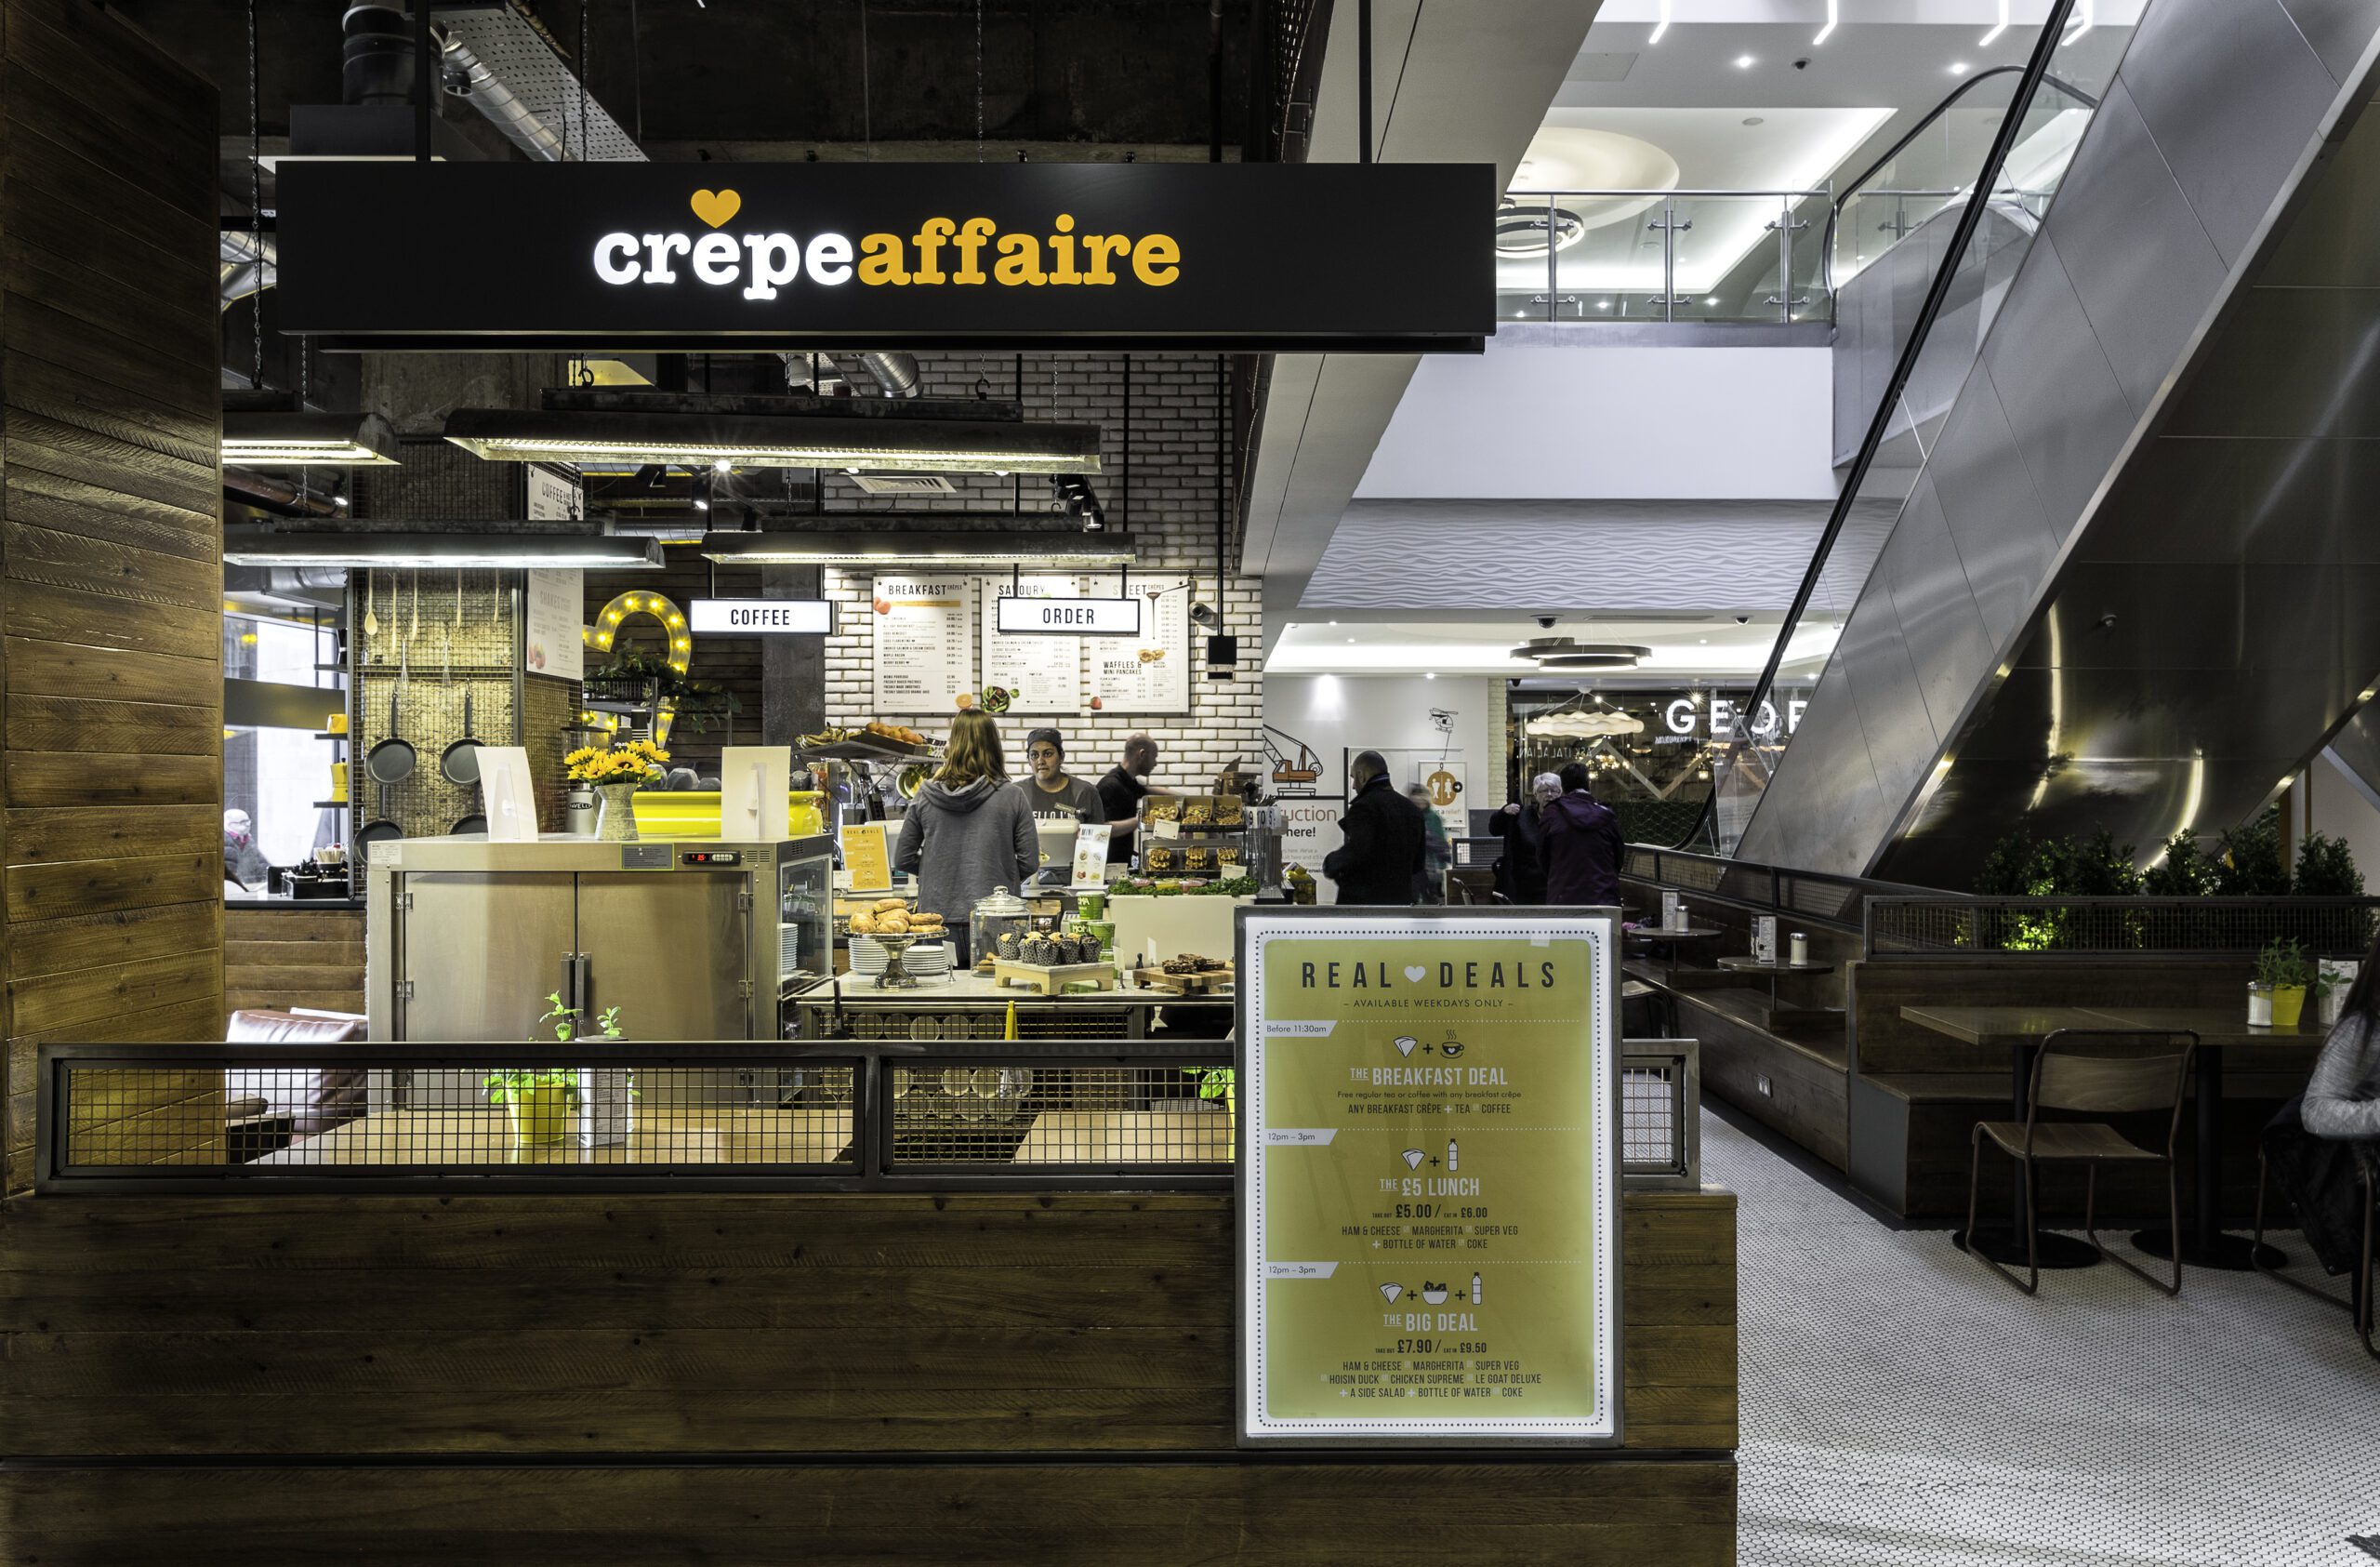 Crepeaffaire order management system powered by Vita Mojo